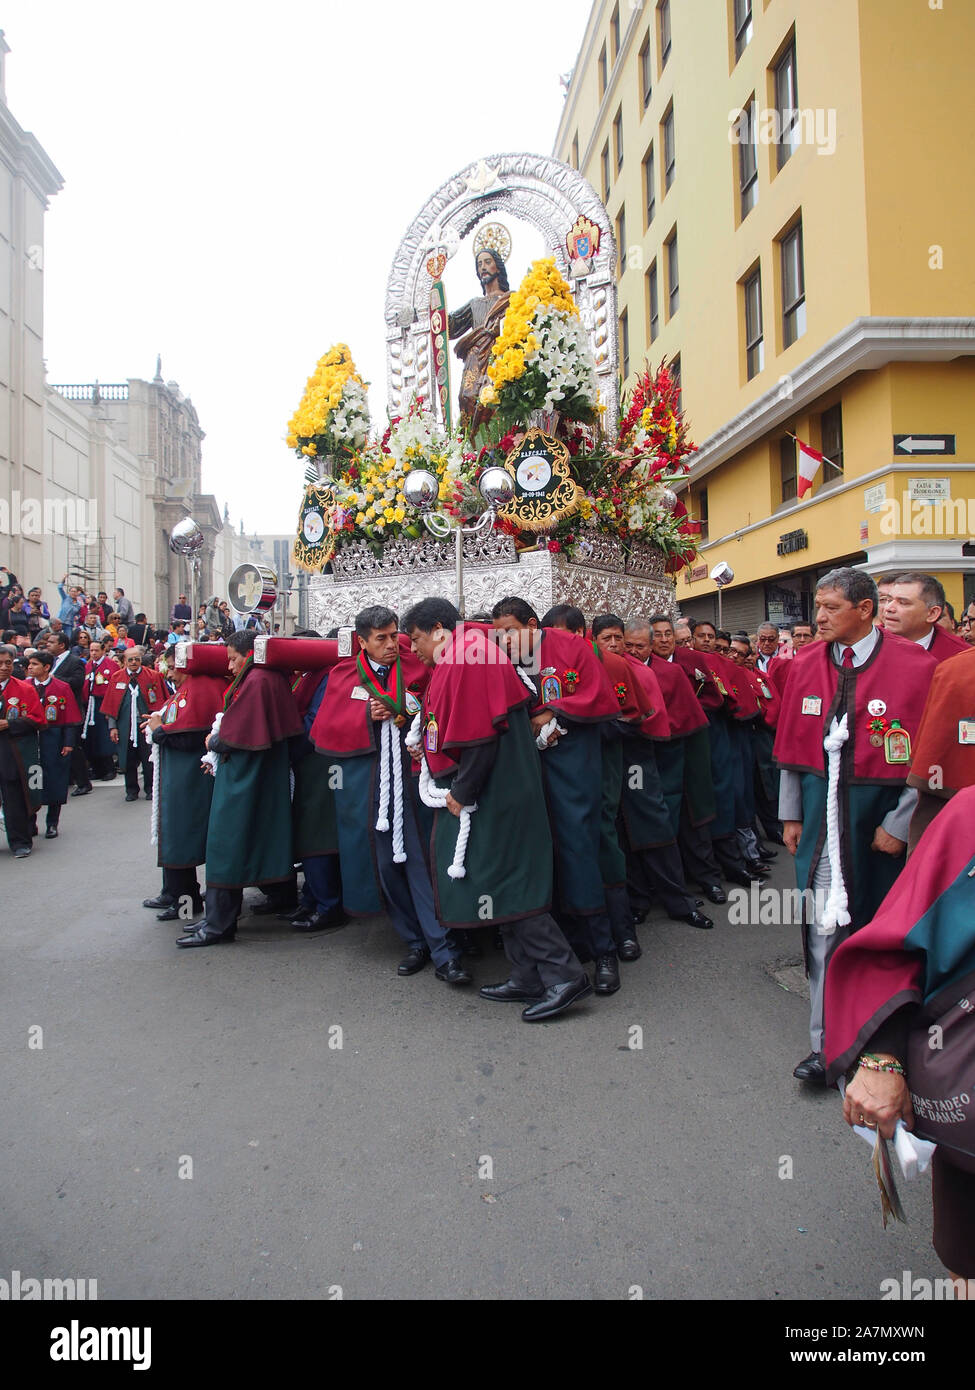 Penitents carrying a religious altar when participating in the procession and parade for Jude the Apostle (Saint Jude Thaddeus) in Lima downtown. Stock Photo